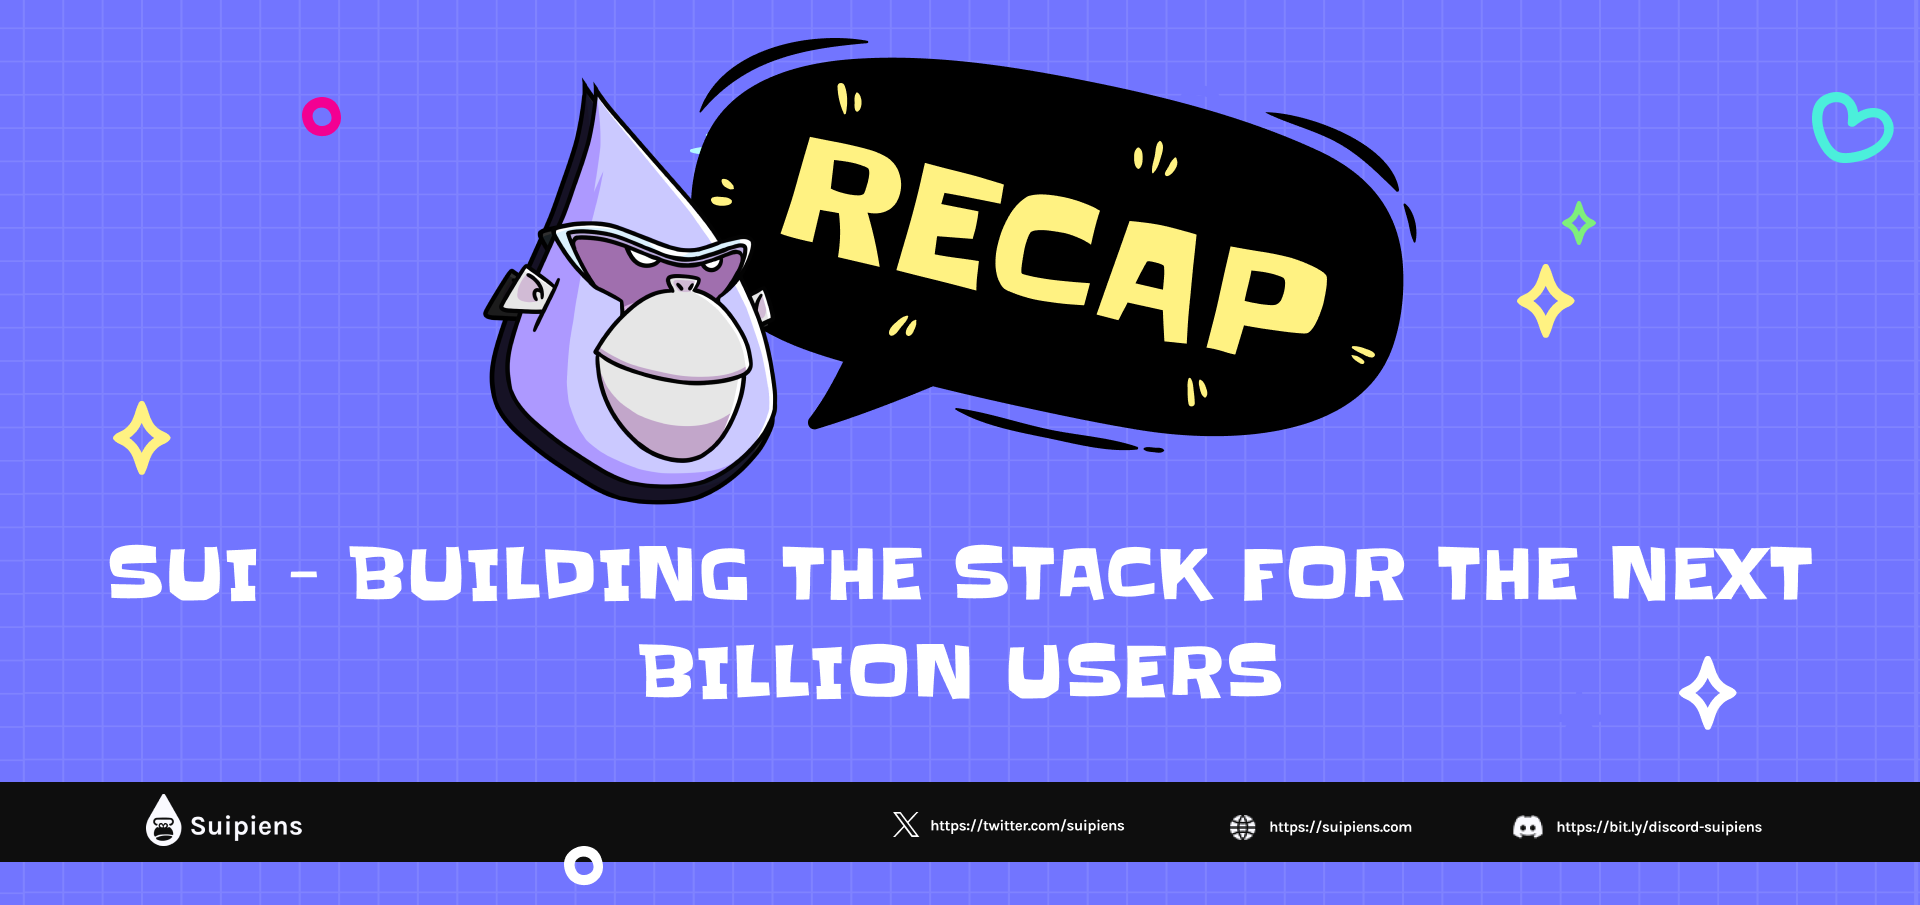 Recap: Sui - Building the stack for the next billion users